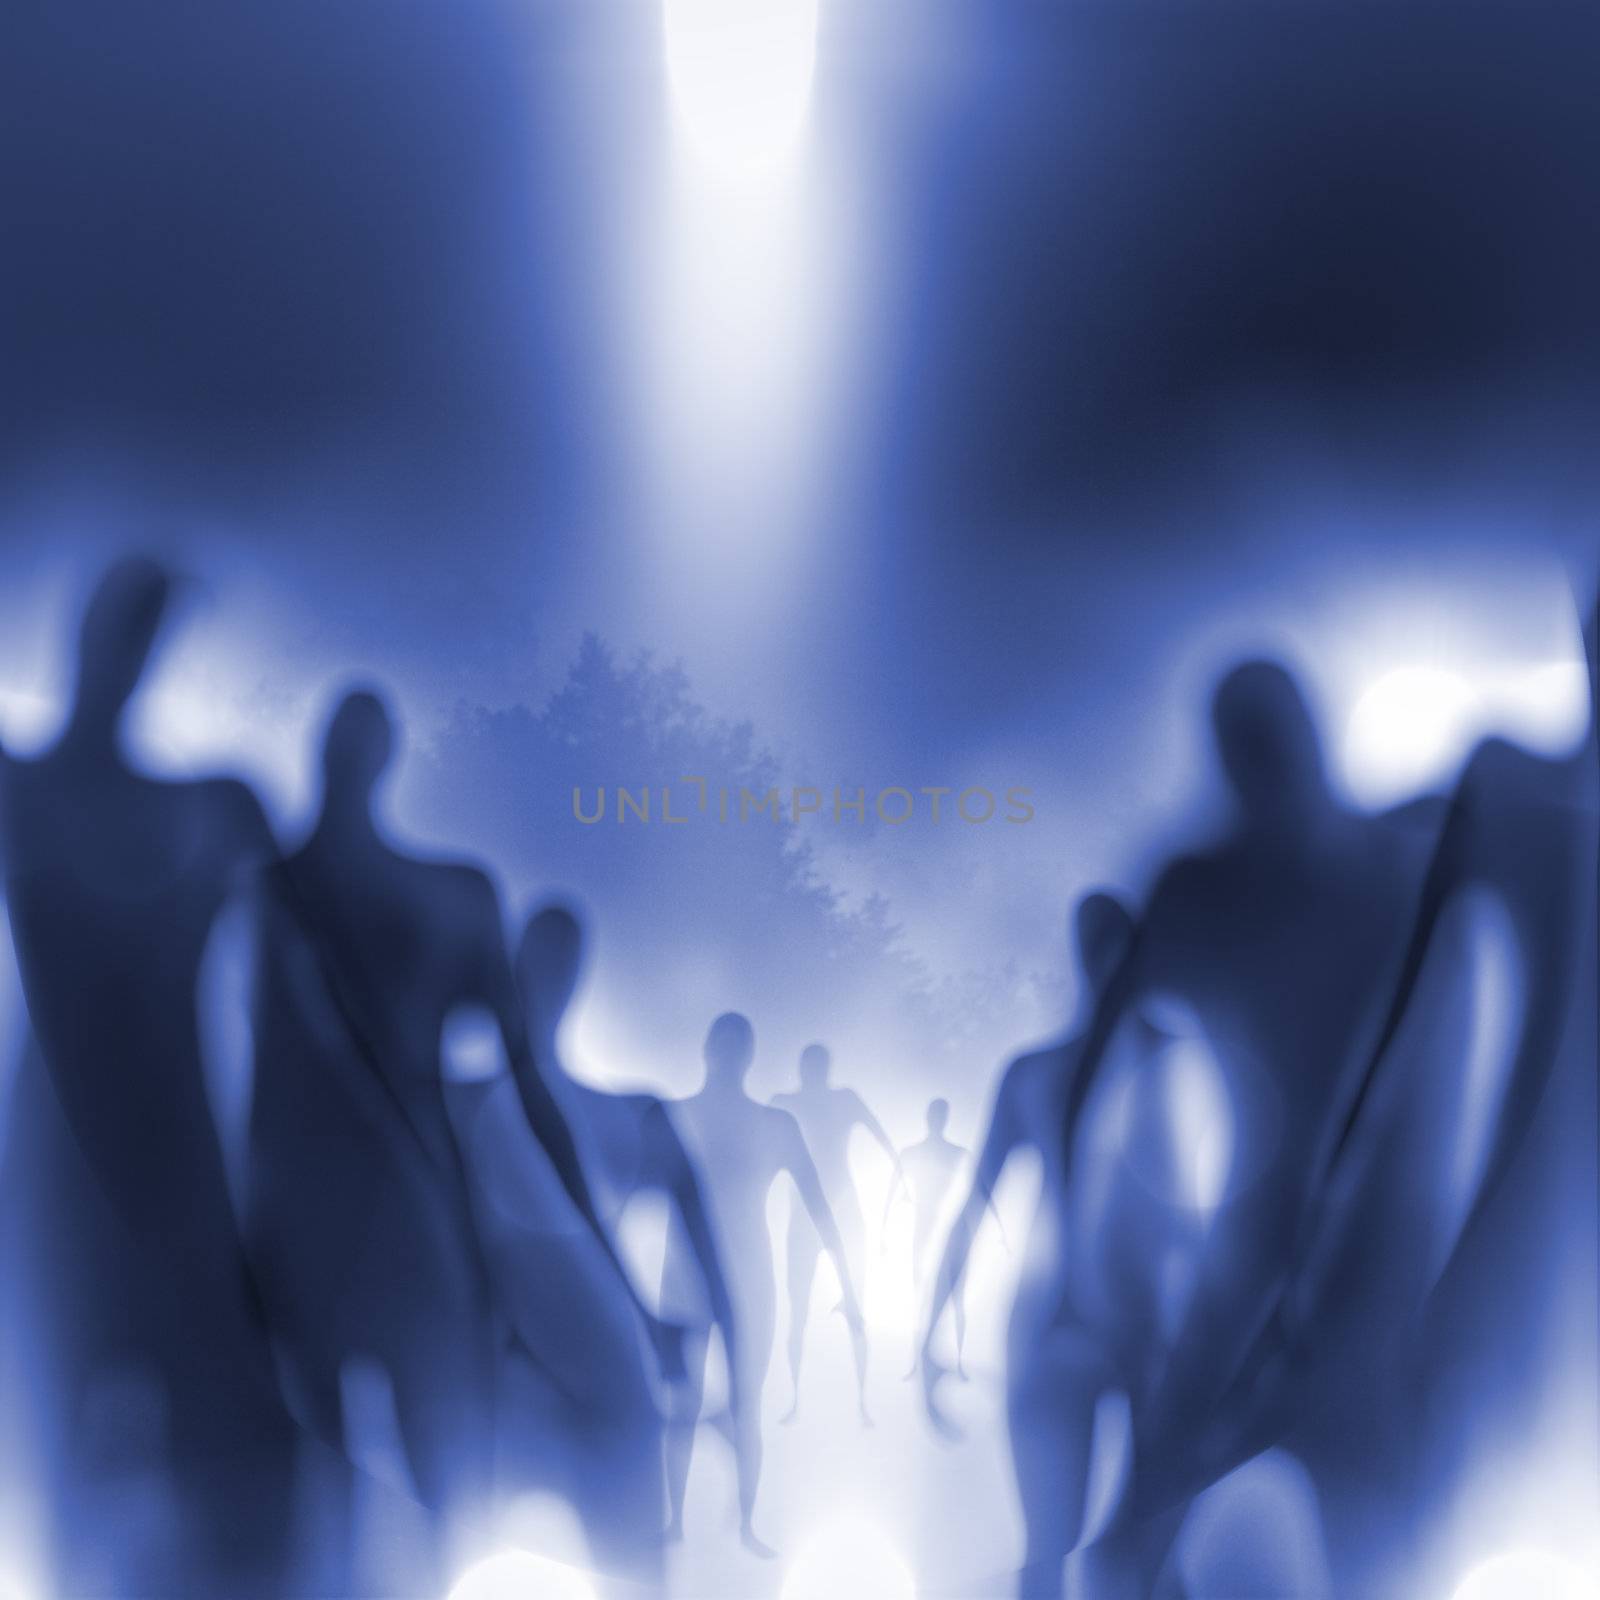 Grainy and blurry image of human-like beings approaching.